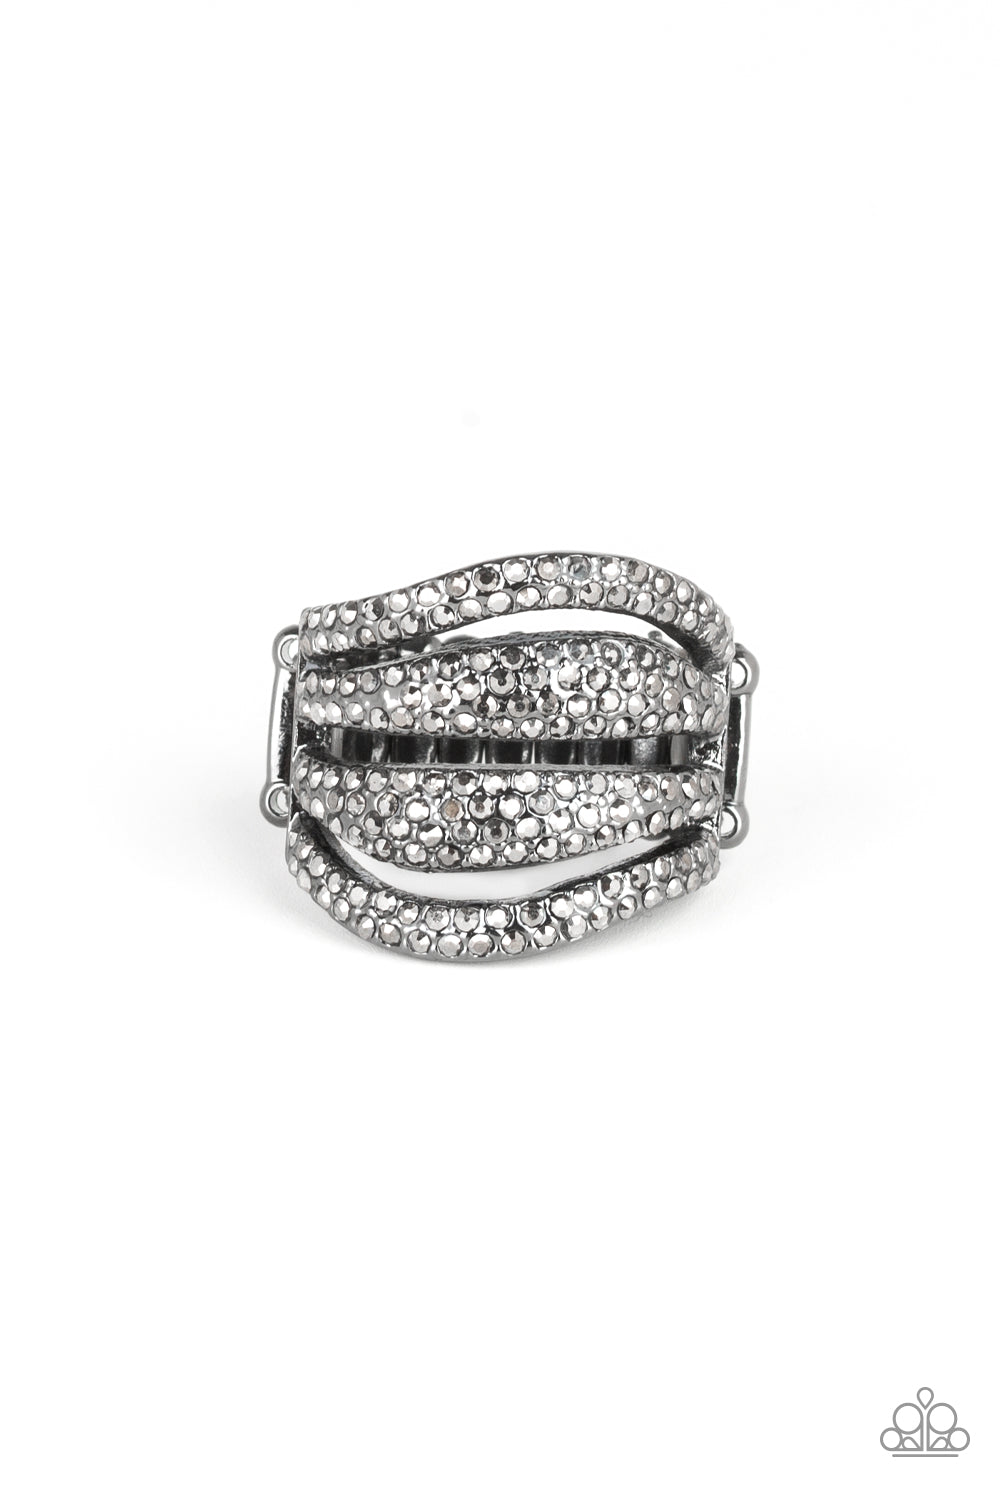 Paparazzi Roll Out The Diamonds Black Ring - Life Of The Party Exclusi ...